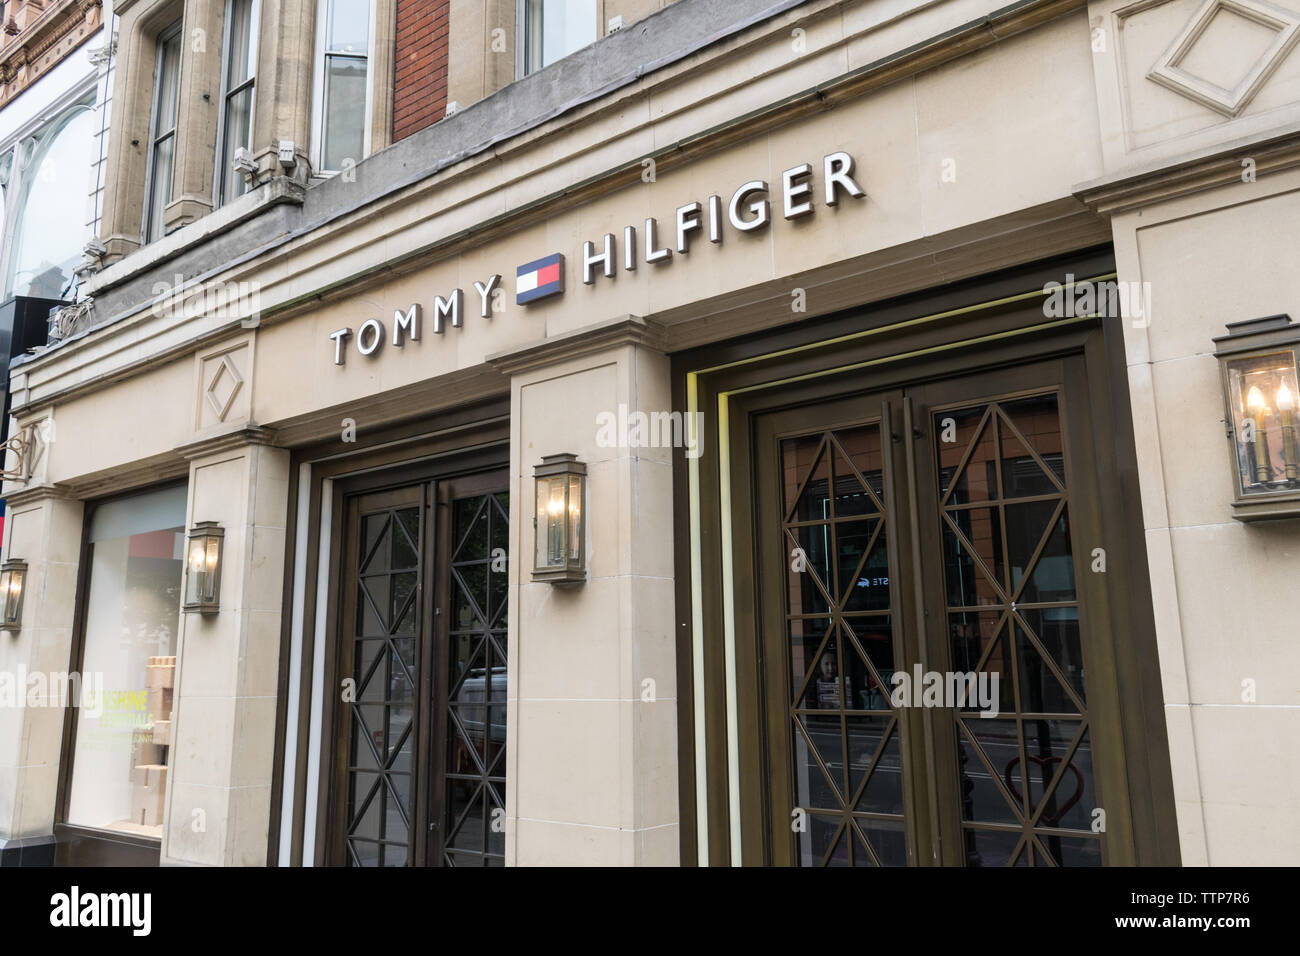 Tommy hilfiger clothes hi-res stock photography and images - Alamy